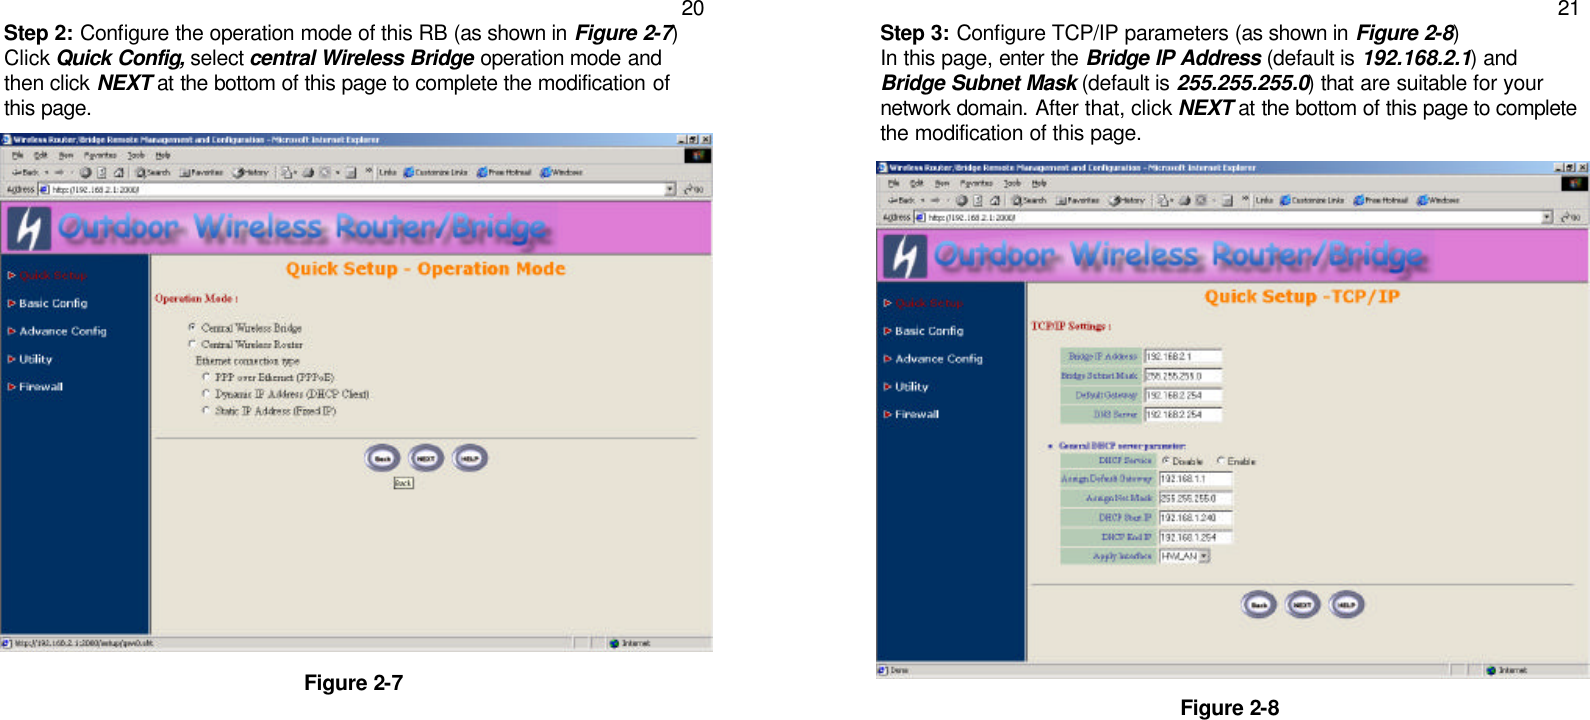   20 Step 2: Configure the operation mode of this RB (as shown in Figure 2-7) Click Quick Config, select central Wireless Bridge operation mode and then click NEXT at the bottom of this page to complete the modification of this page.                       Figure 2-7       21 Step 3: Configure TCP/IP parameters (as shown in Figure 2-8) In this page, enter the Bridge IP Address (default is 192.168.2.1) and Bridge Subnet Mask (default is 255.255.255.0) that are suitable for your network domain. After that, click NEXT at the bottom of this page to complete the modification of this page.                       Figure 2-8      